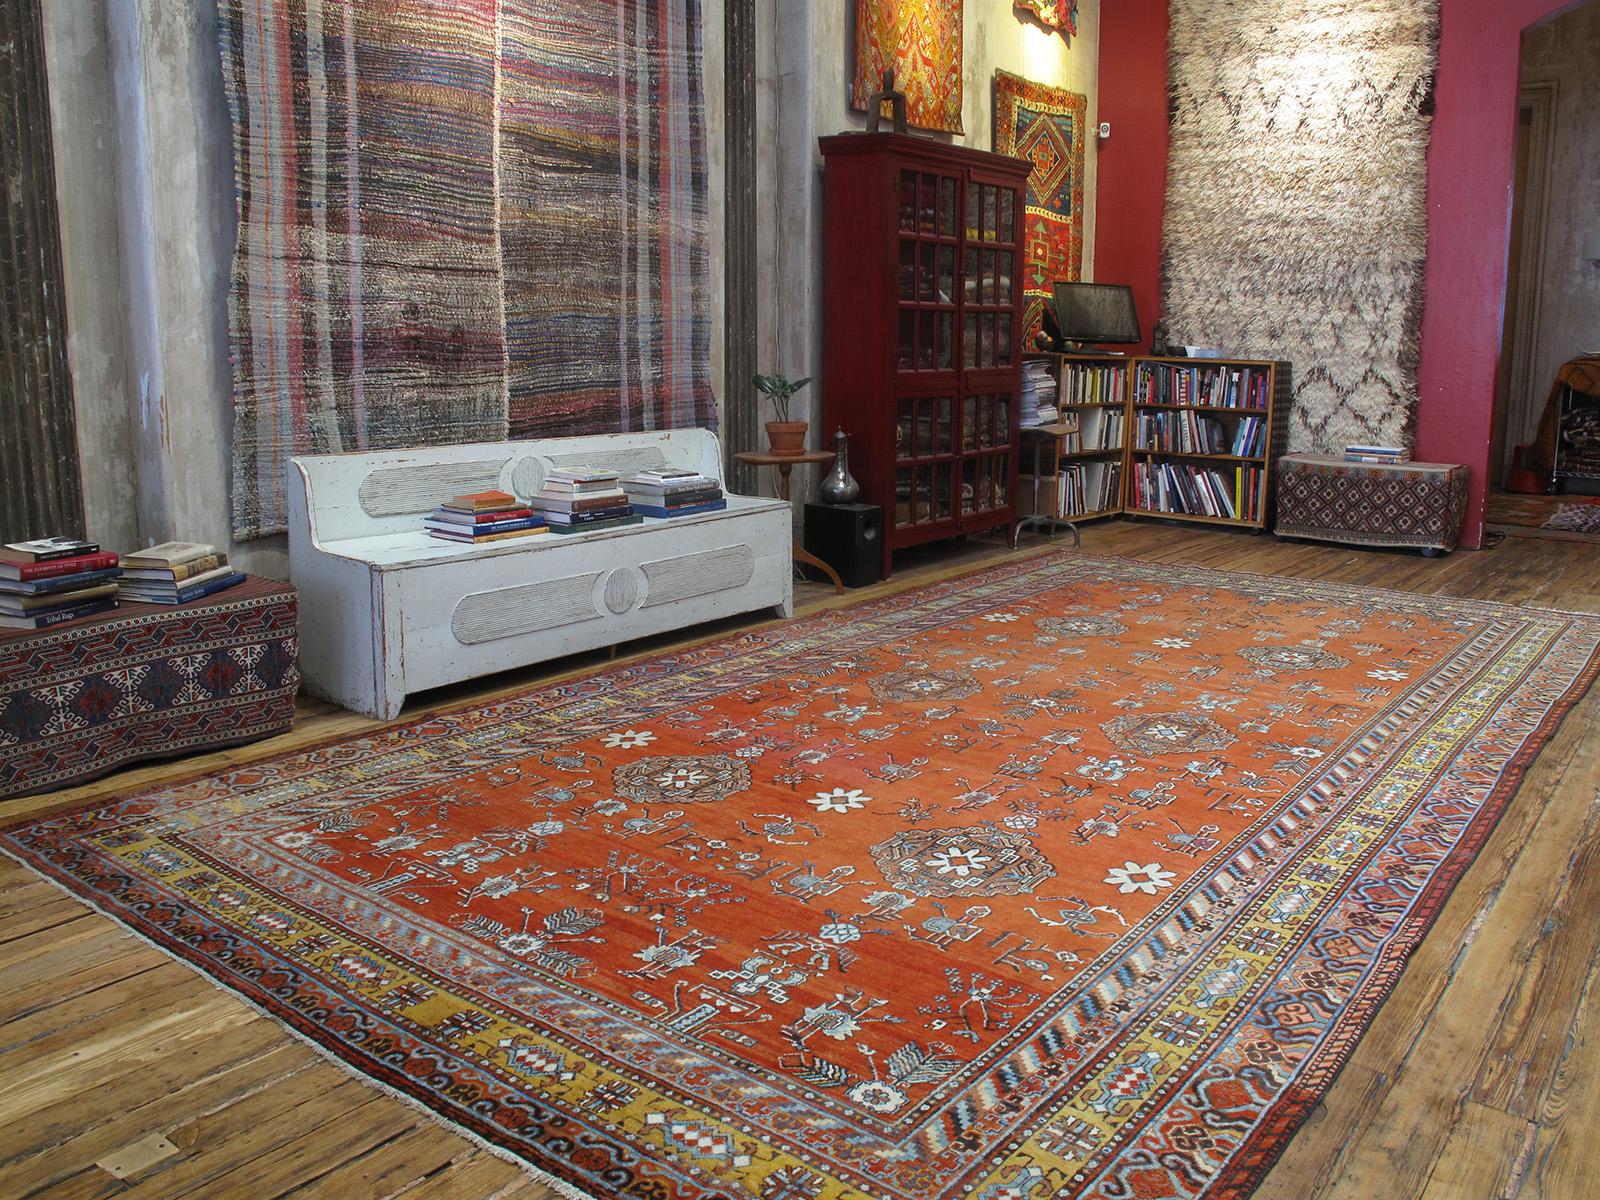 Woven in the border regions of Western China, where Chinese culture meets the Turco-Persian world of Central Asia, Khotan carpets like this feature symbols and design elements of both cultures. A very nice example of rare large proportions that